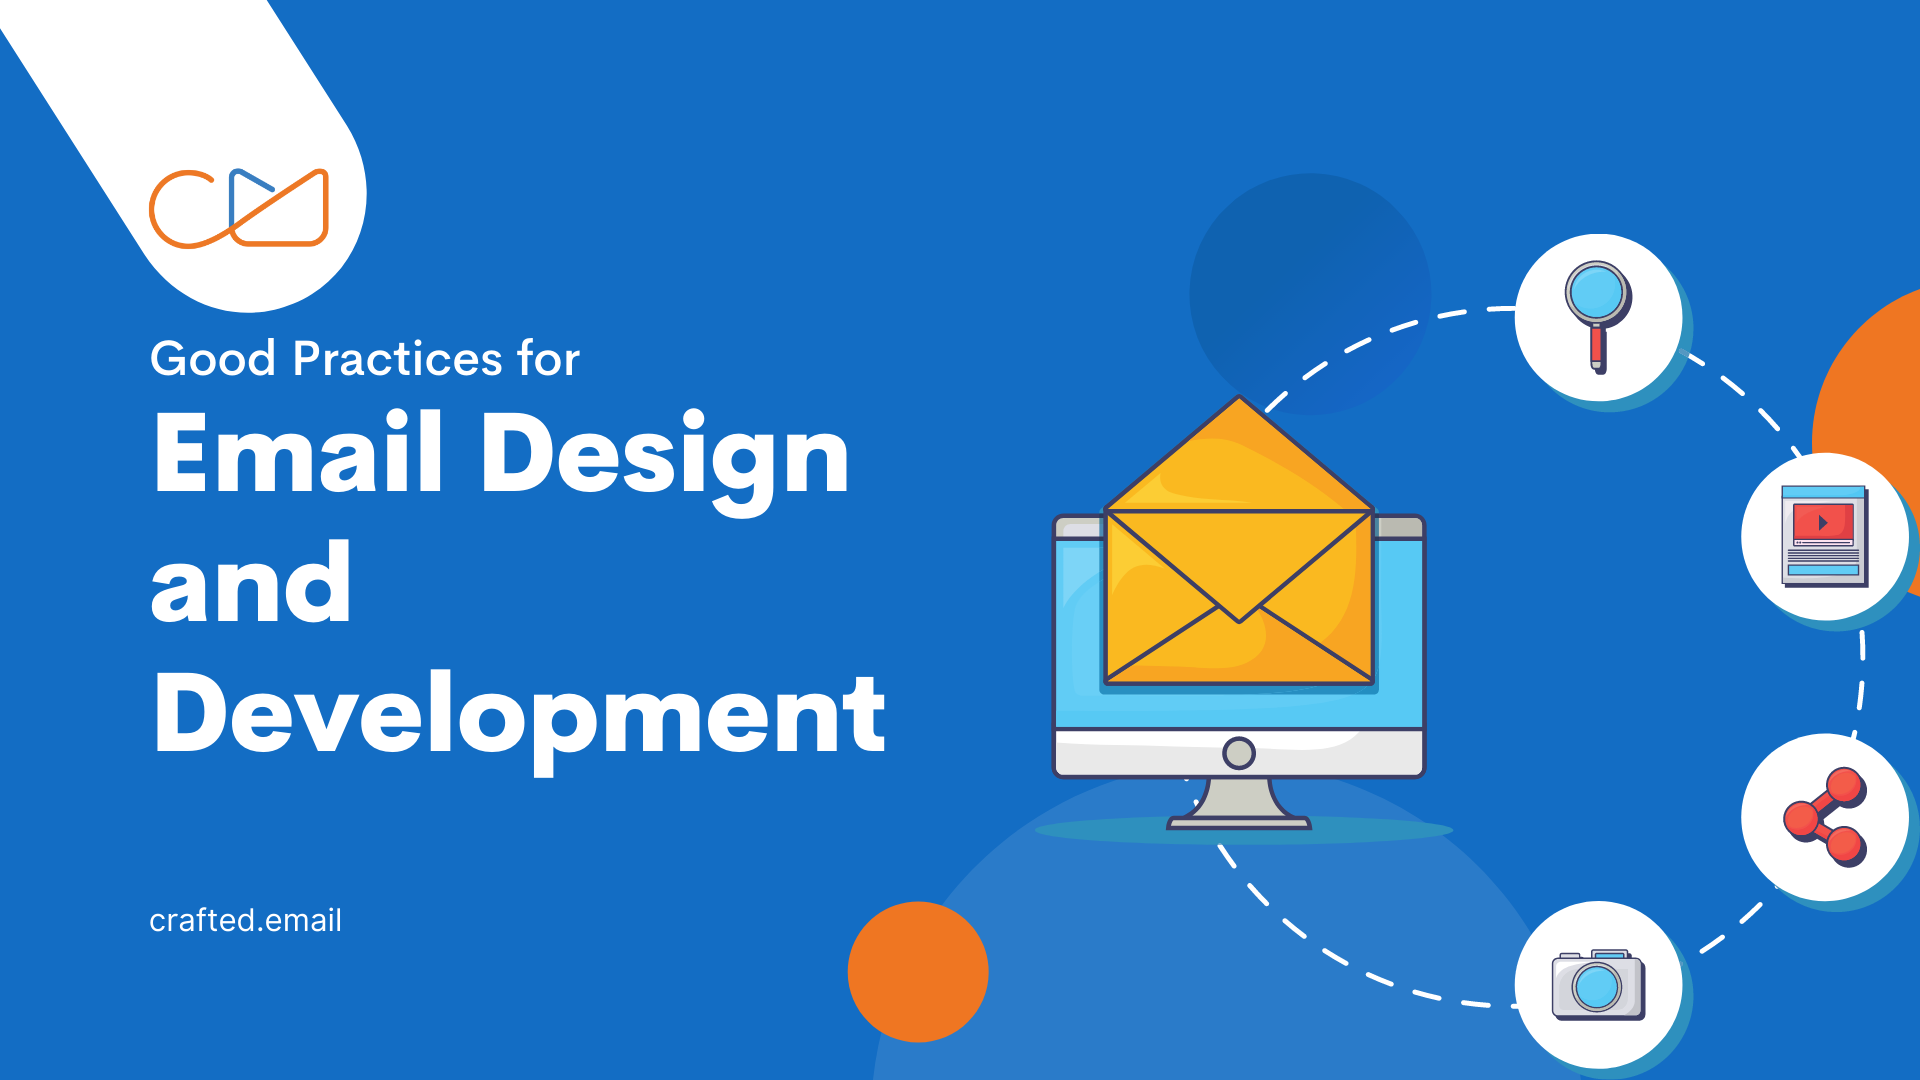 Good Practices for Email Design and Development